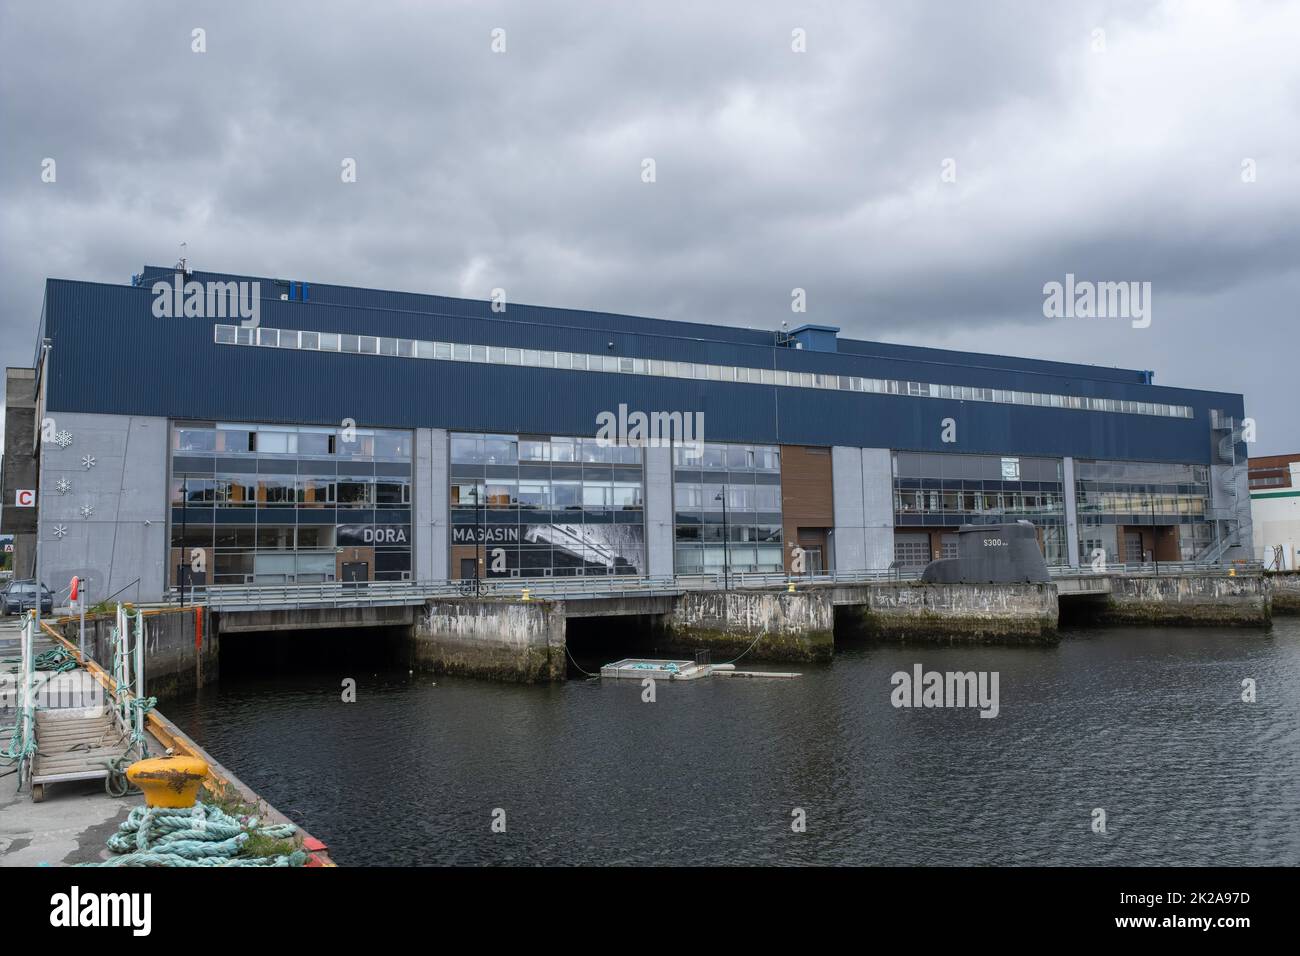 Trondheim, Norway - July 05, 2022: Dora I. This U-boat bunker is located in Trondheim. It had a capacity of 15 boats. Summer cloudy day. Selective foc Stock Photo